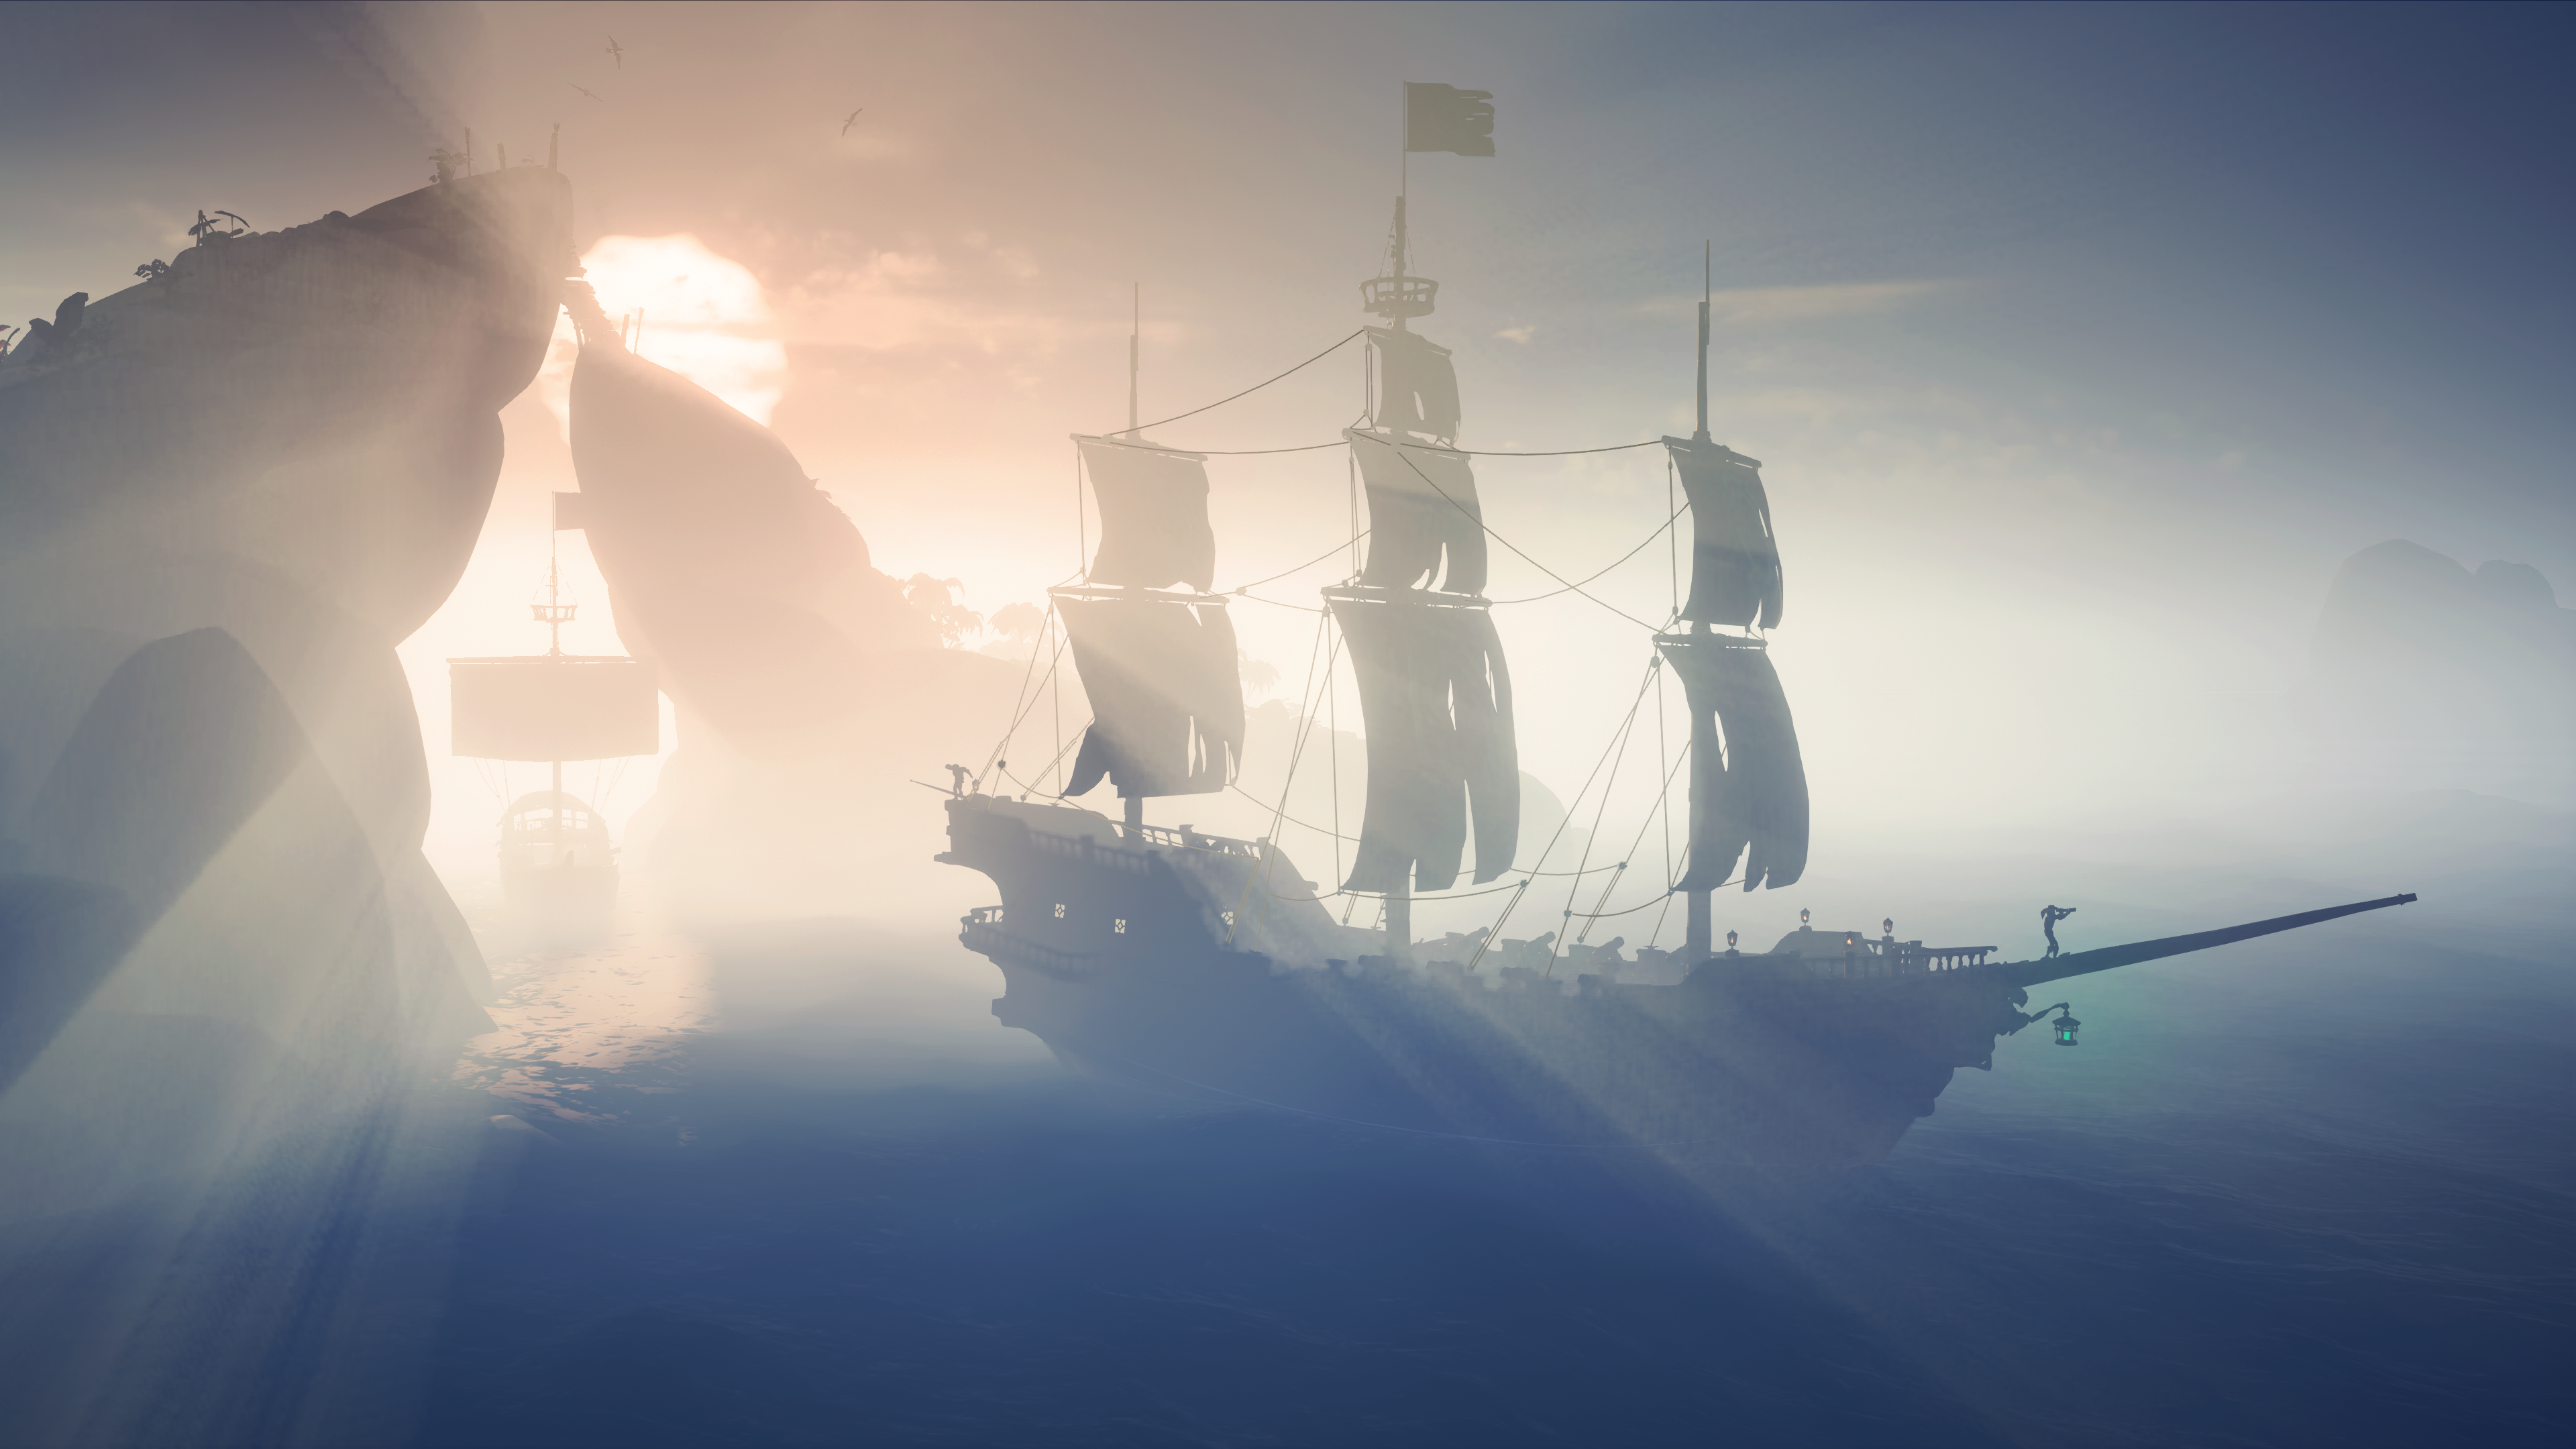 “Sea of Thieves” Shrouded Spoils Ship in Fog